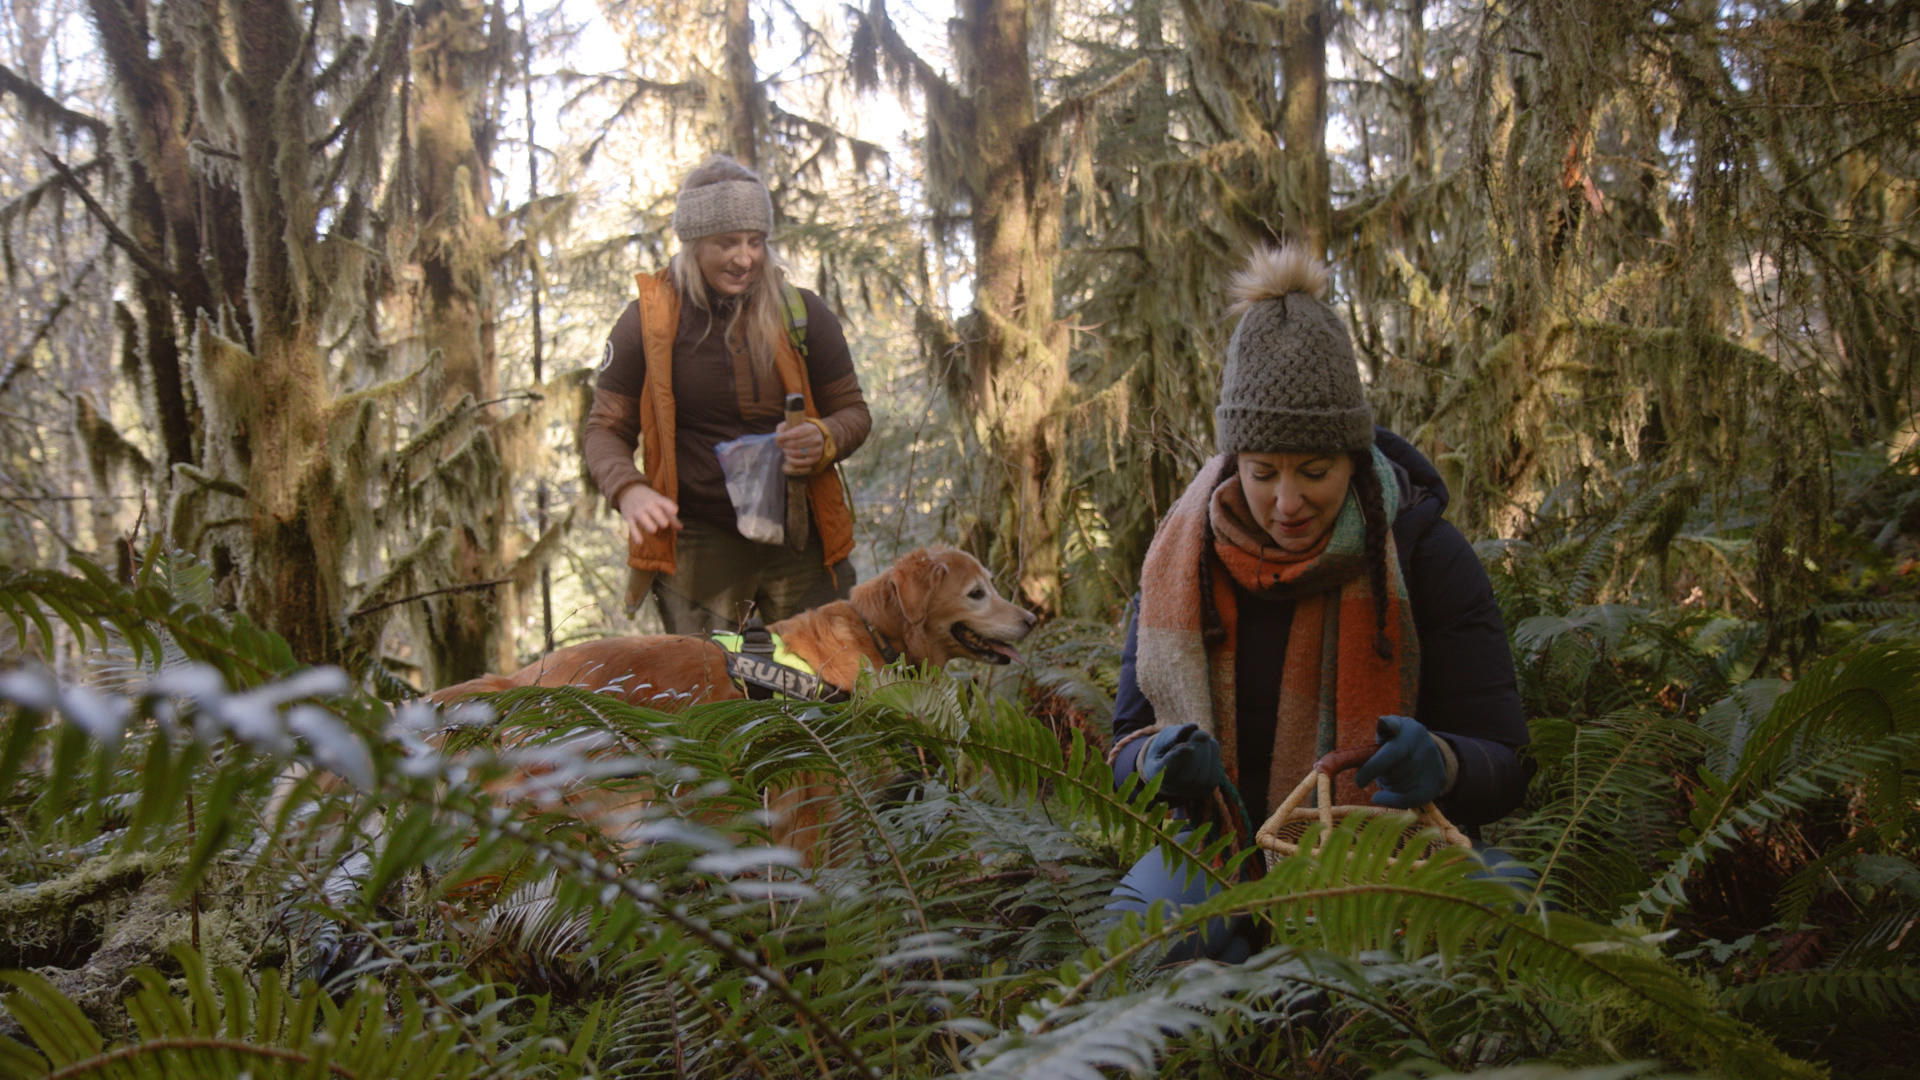 Host Rachel Belle digs up truffles in a mossy forest while her guest Alana McGee guides her along with her golden retriever, Ruby